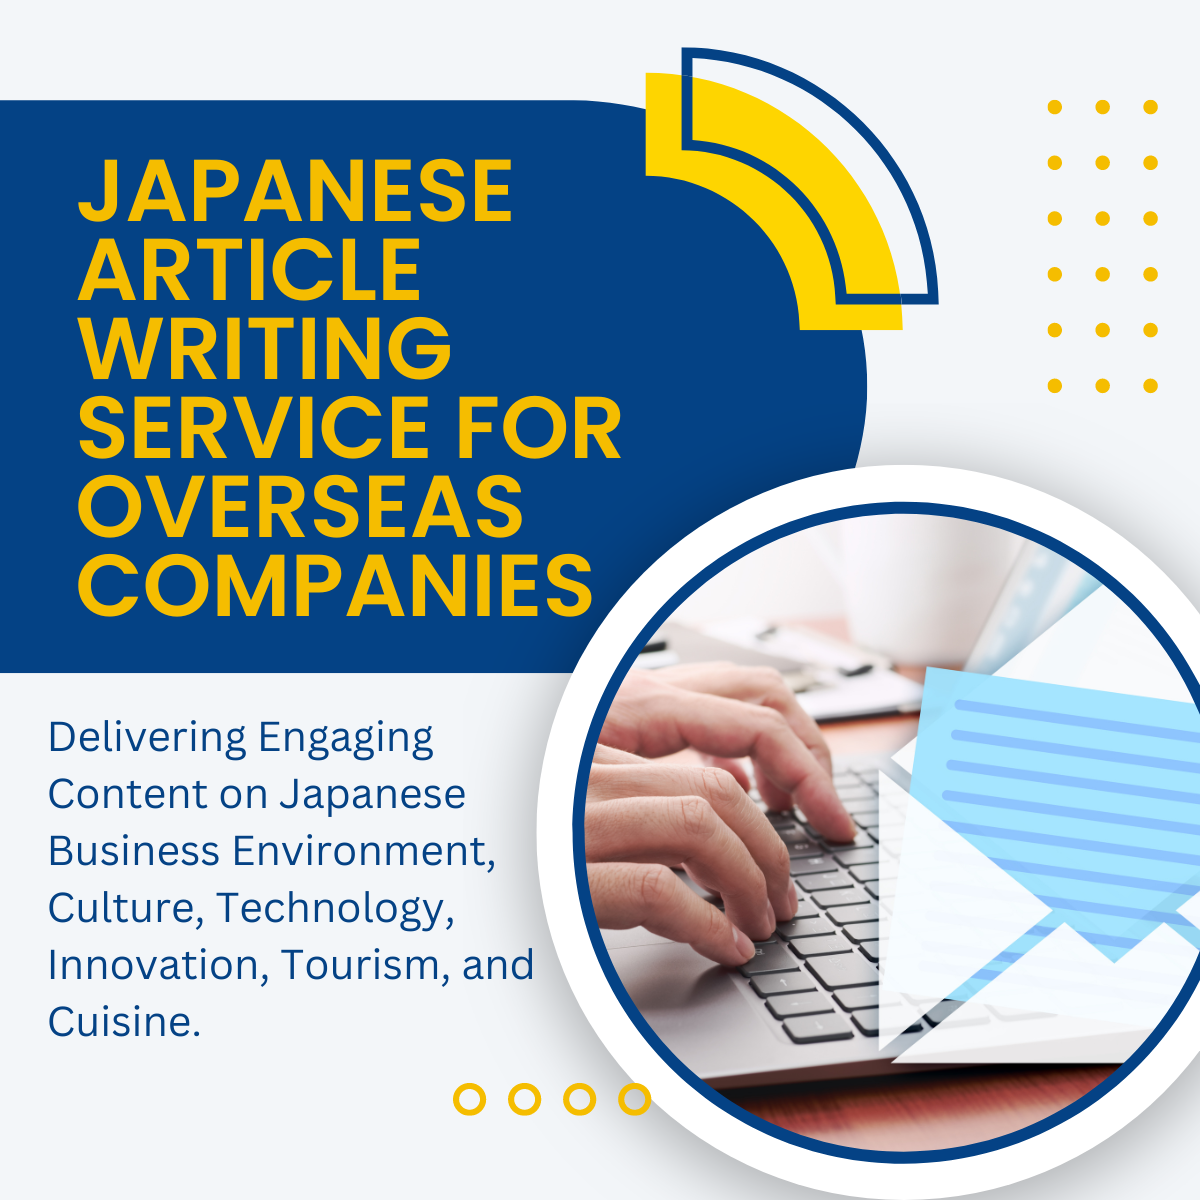 Japanese article writing service for overseas companies